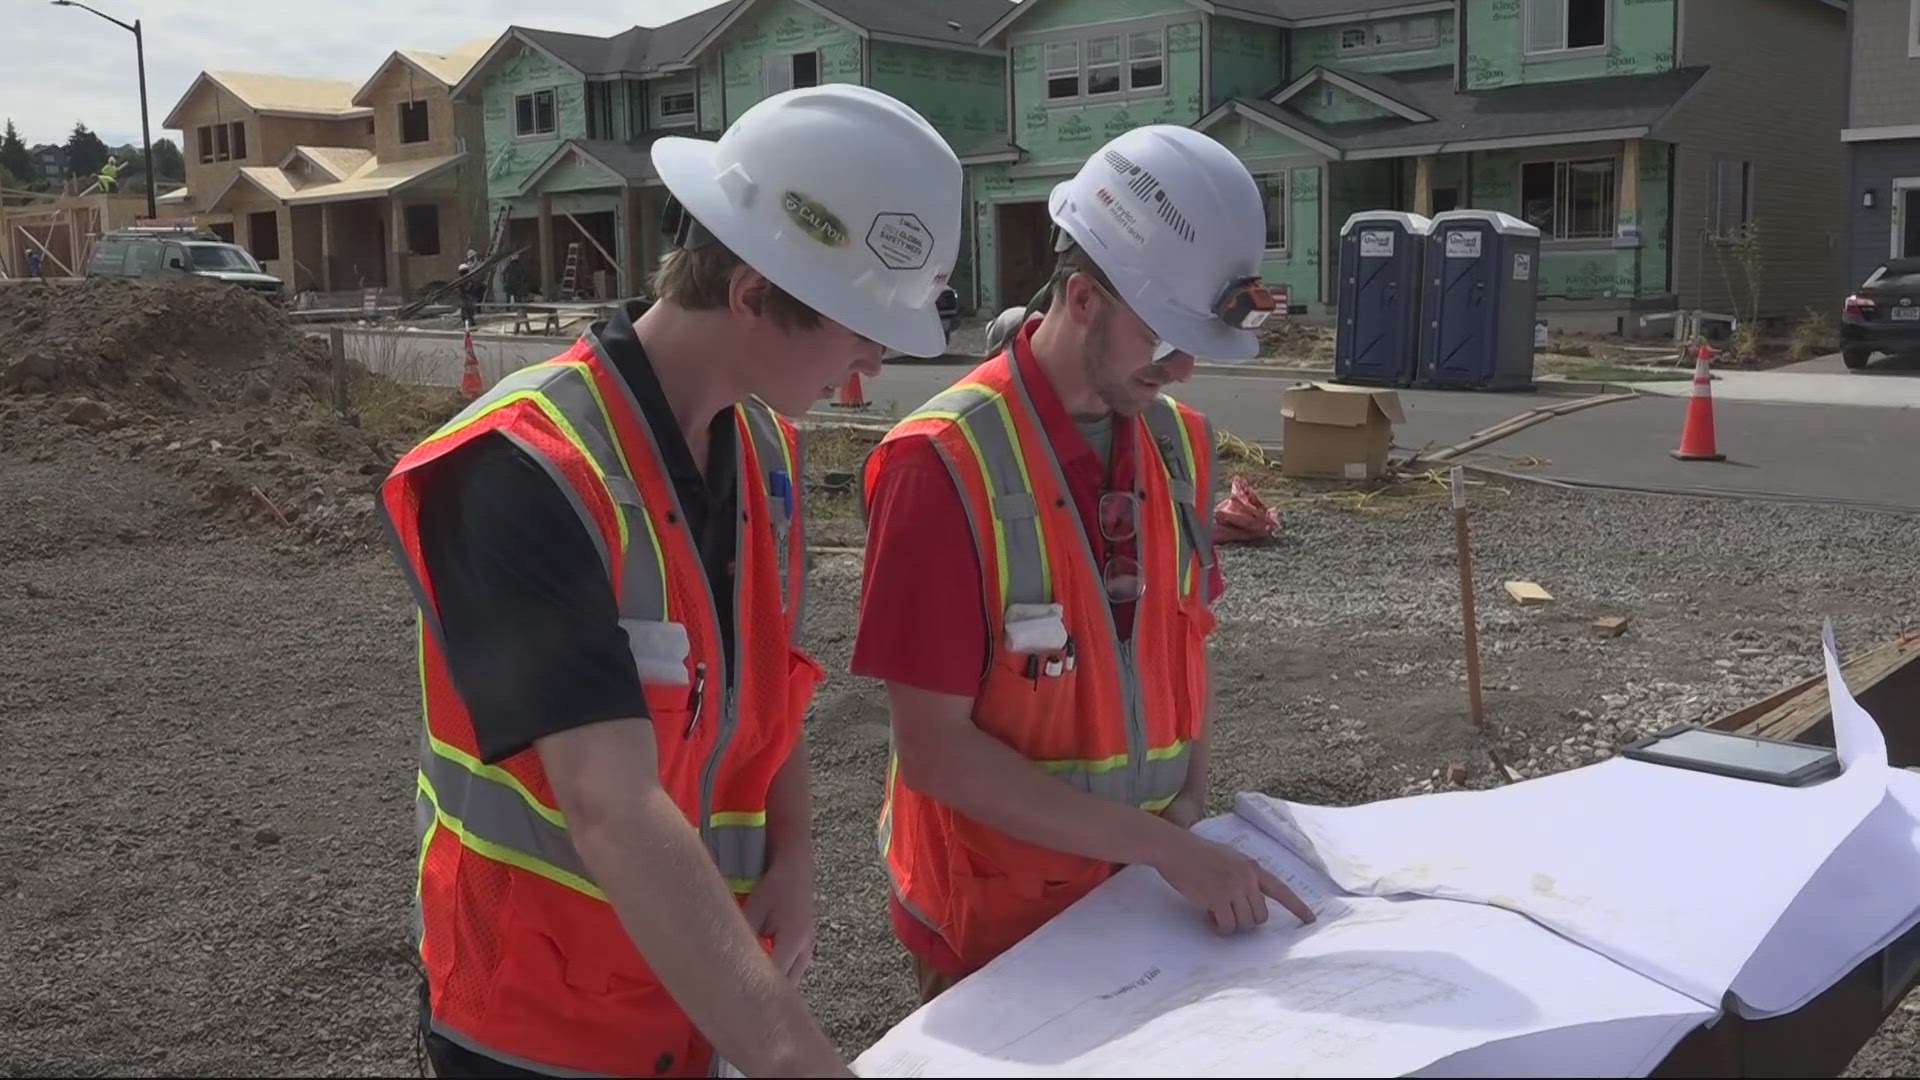 Home builder Taylor Morrison is offering internships to young people looking to join the construction industry, as a large percentage is projected to retire.